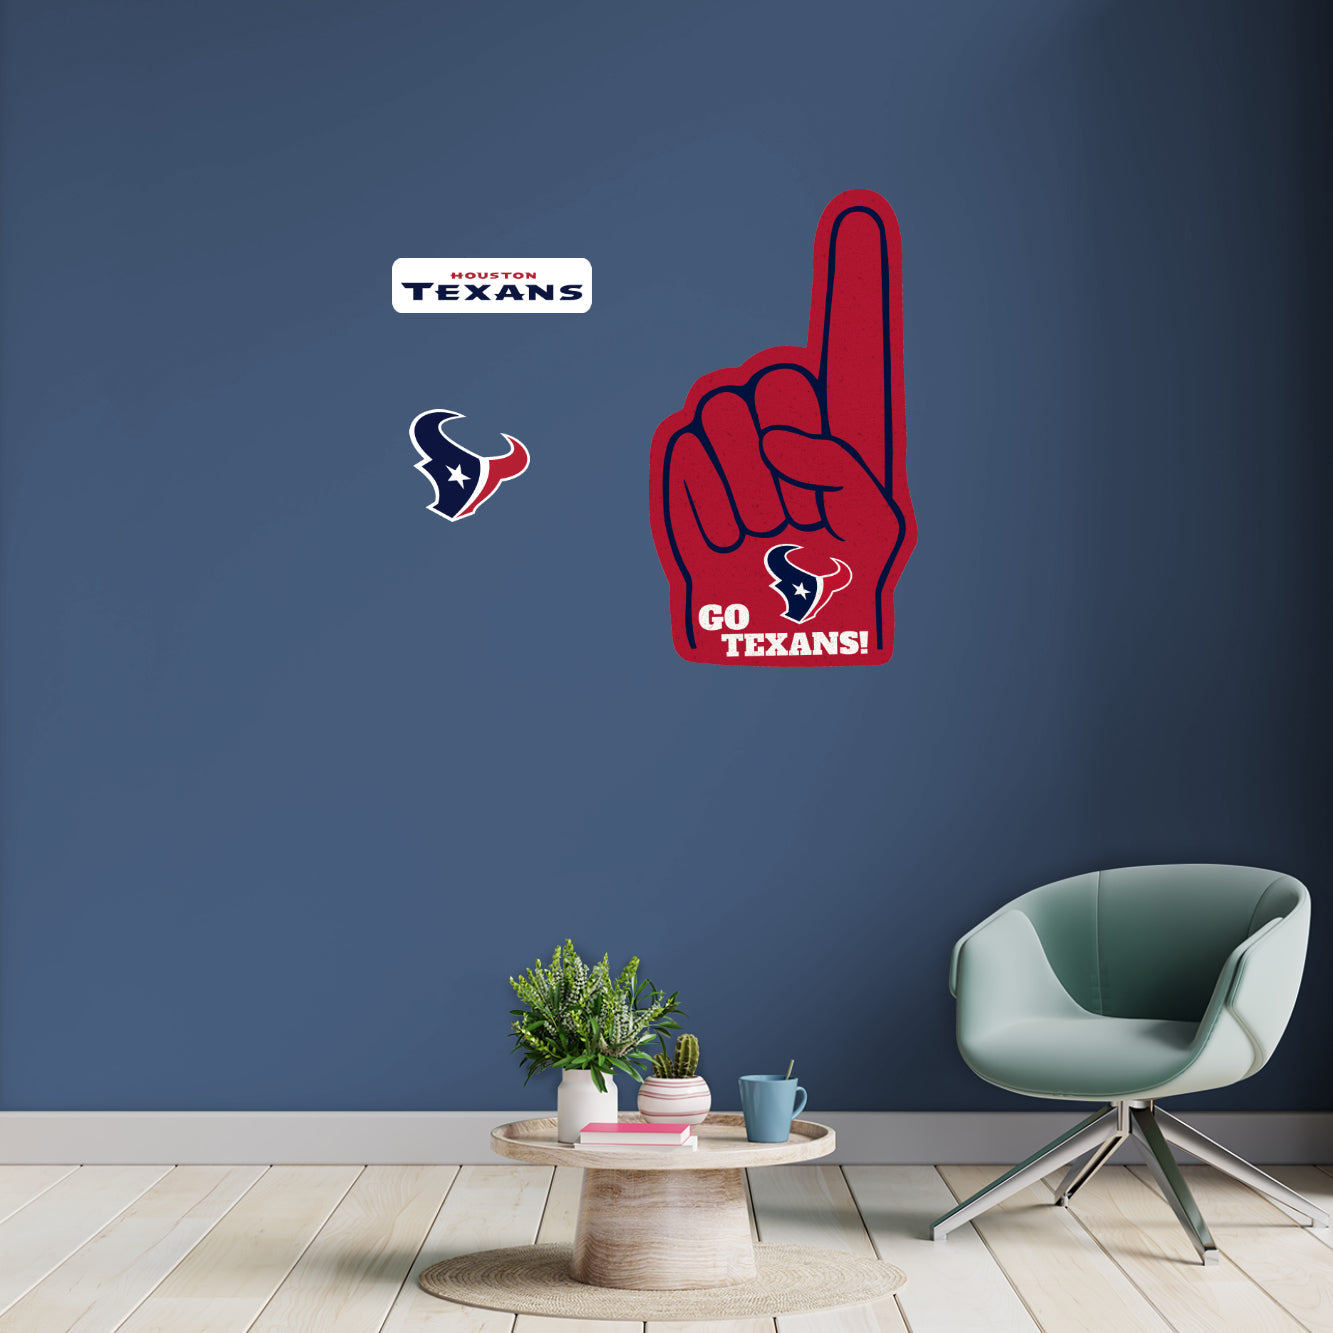 Houston Texans: Foam Finger - Officially Licensed NFL Removable Adhesive Decal